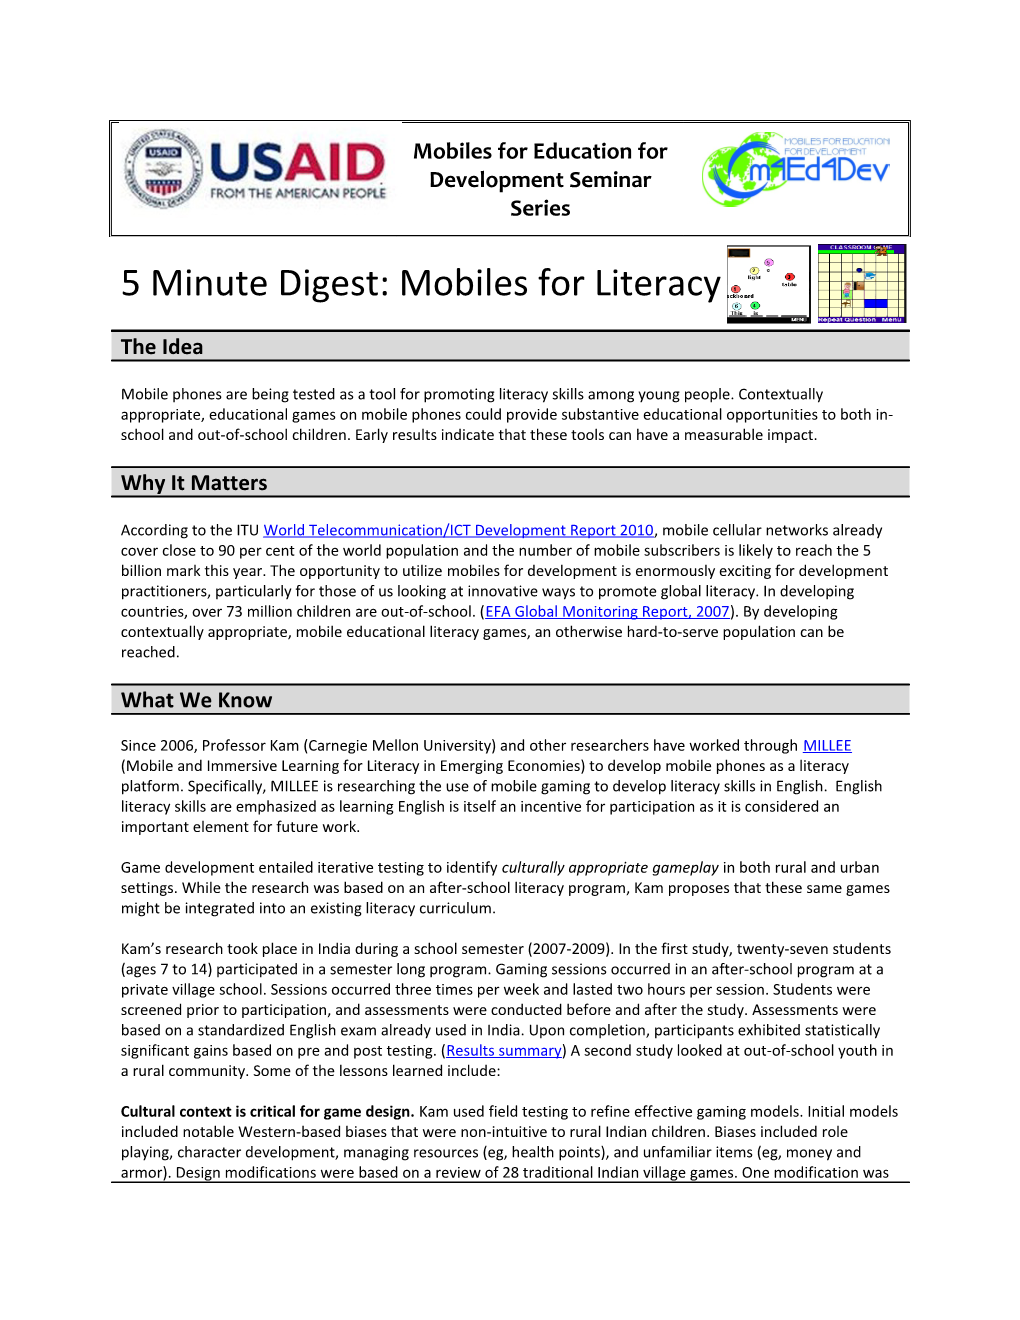 5 Minute Digest: Mobiles for Literacy